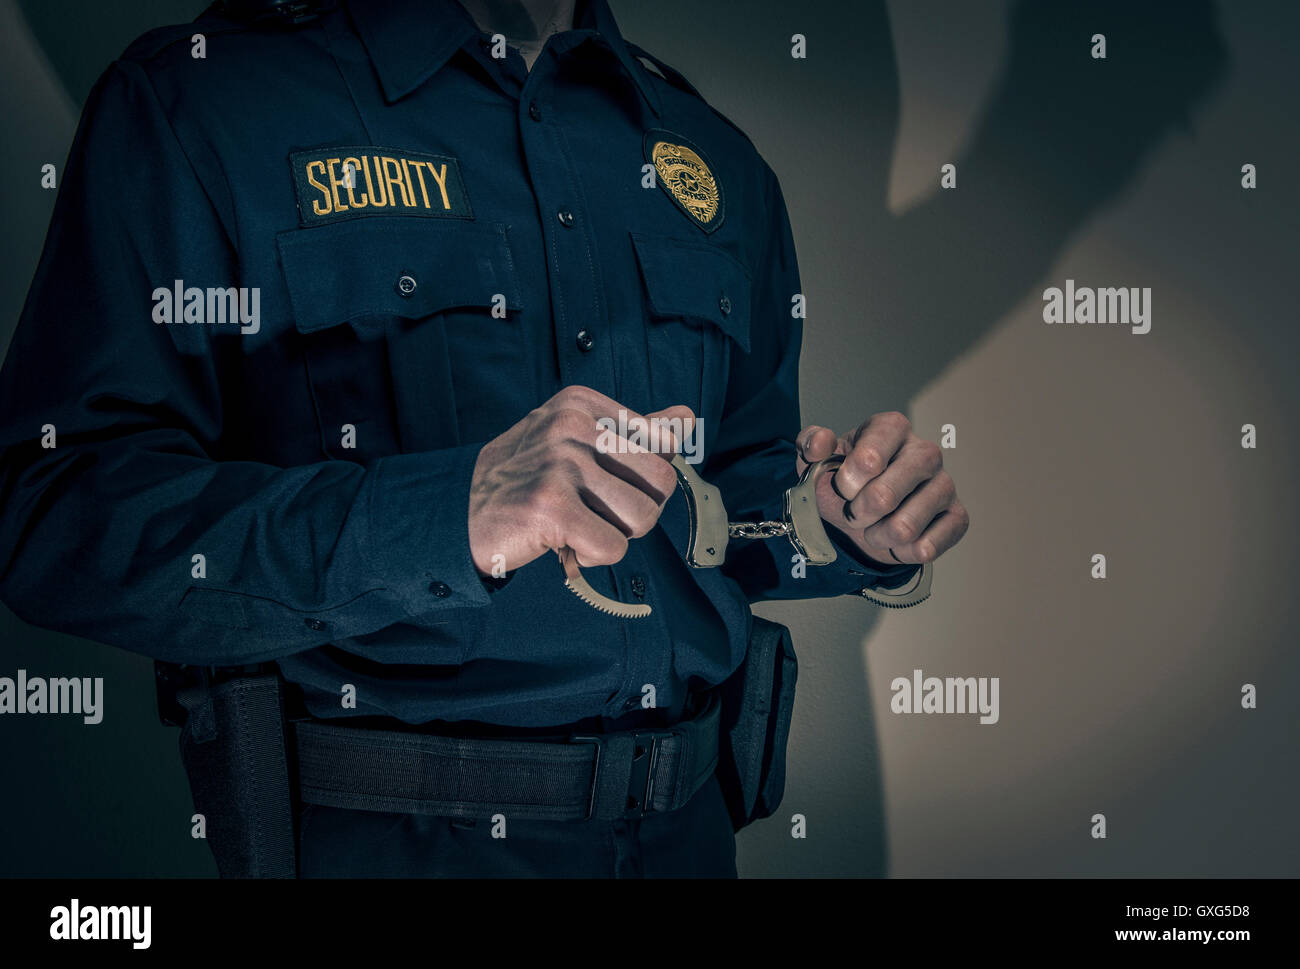 Caucasian security officer holding handcuffs Stock Photo